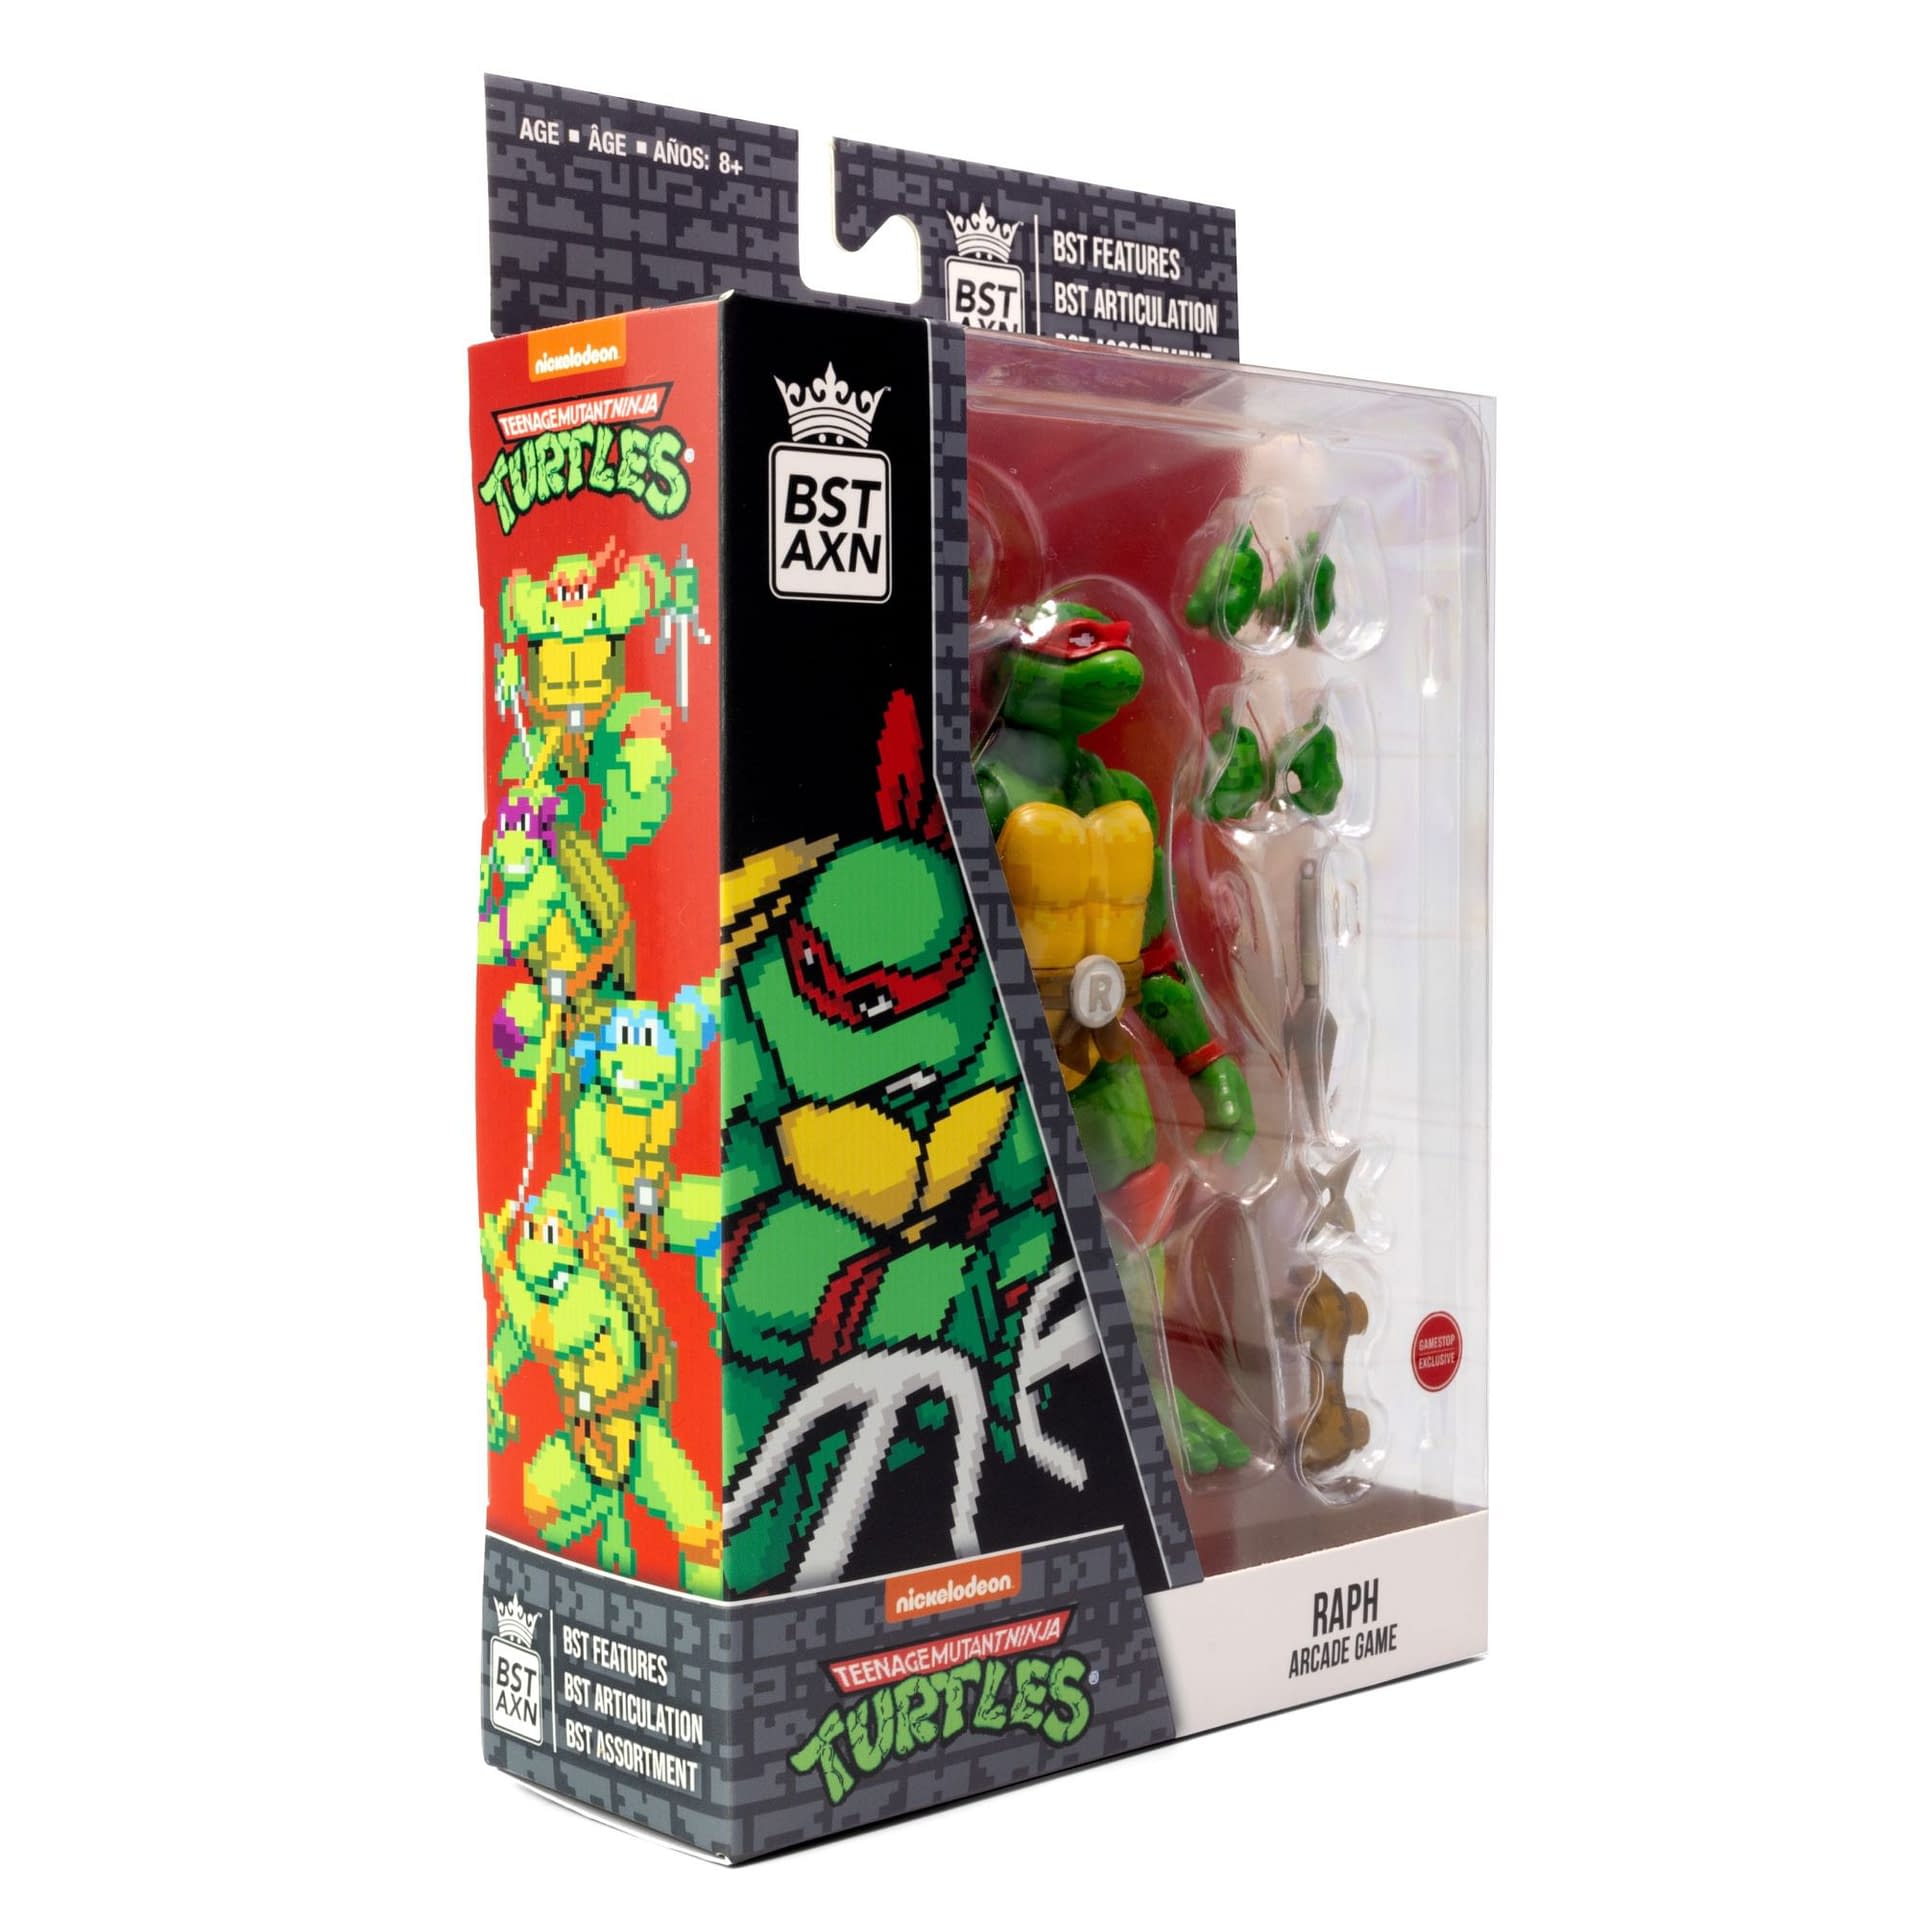 TMNT Gets Pixelated with The Loyal Subject's New GameStop Exclusives